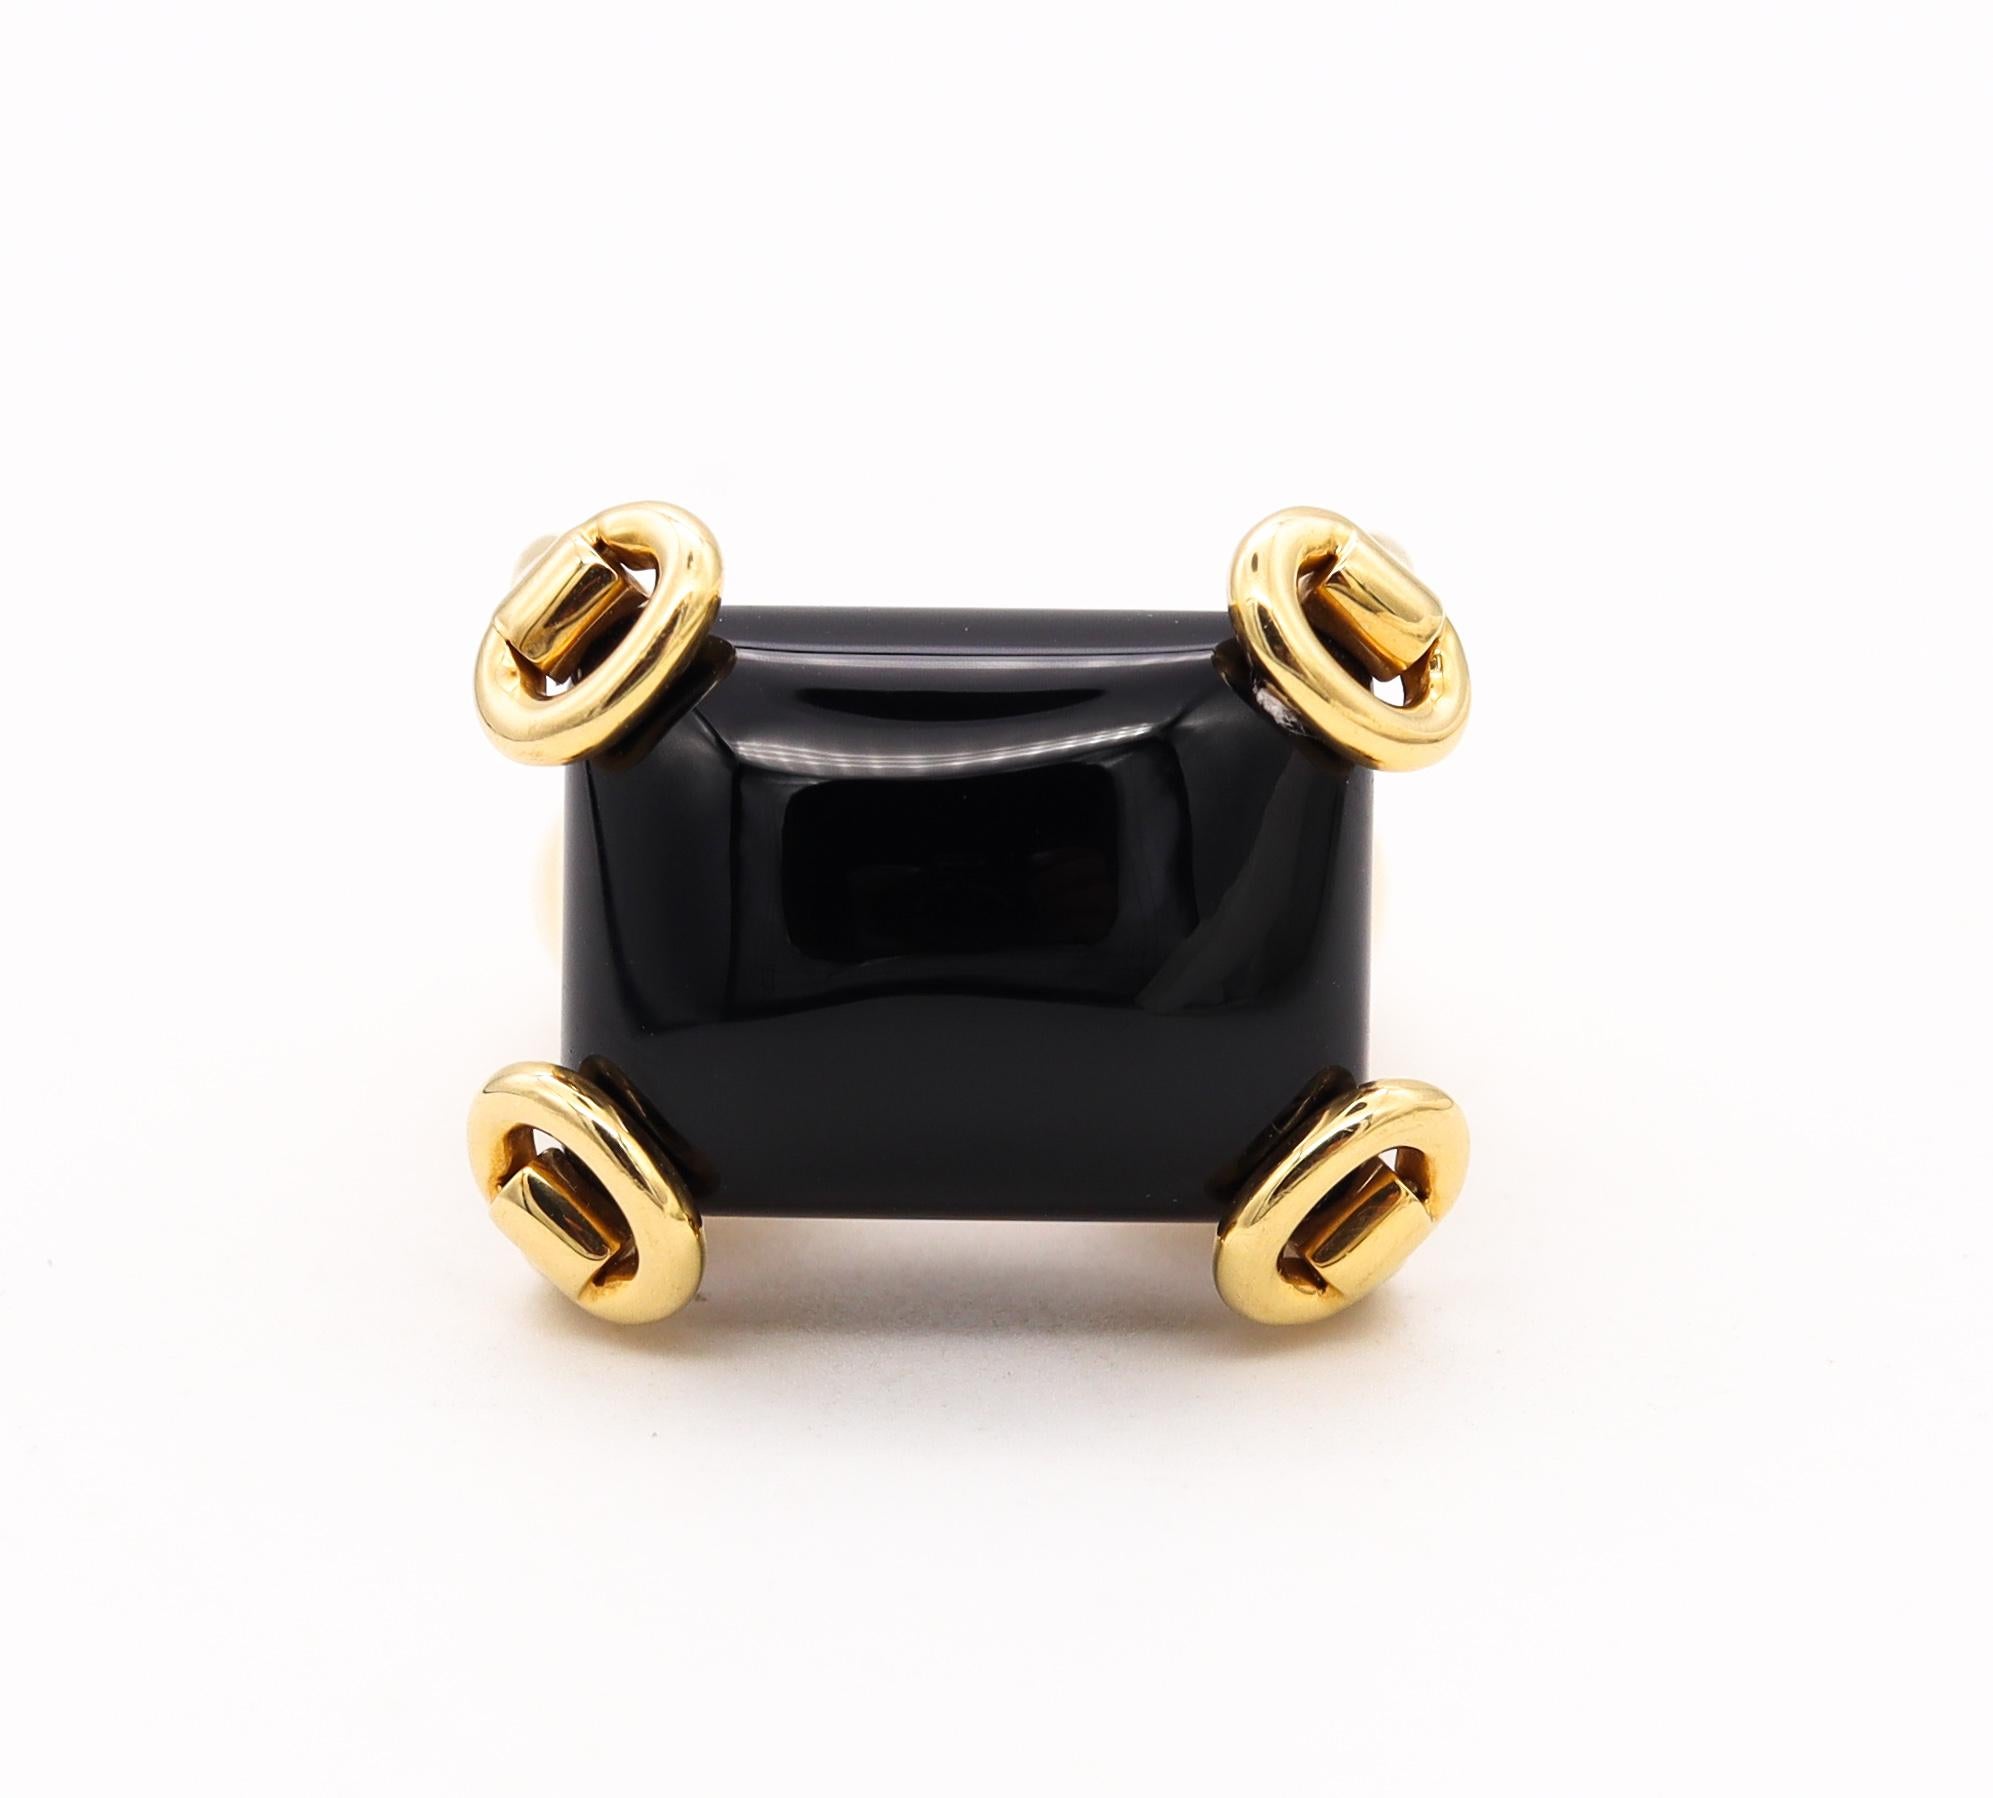 Gucci Milano Horsebit Cocktail Ring in 18Kt Yellow Gold with 26 Cts Black Onyx 1